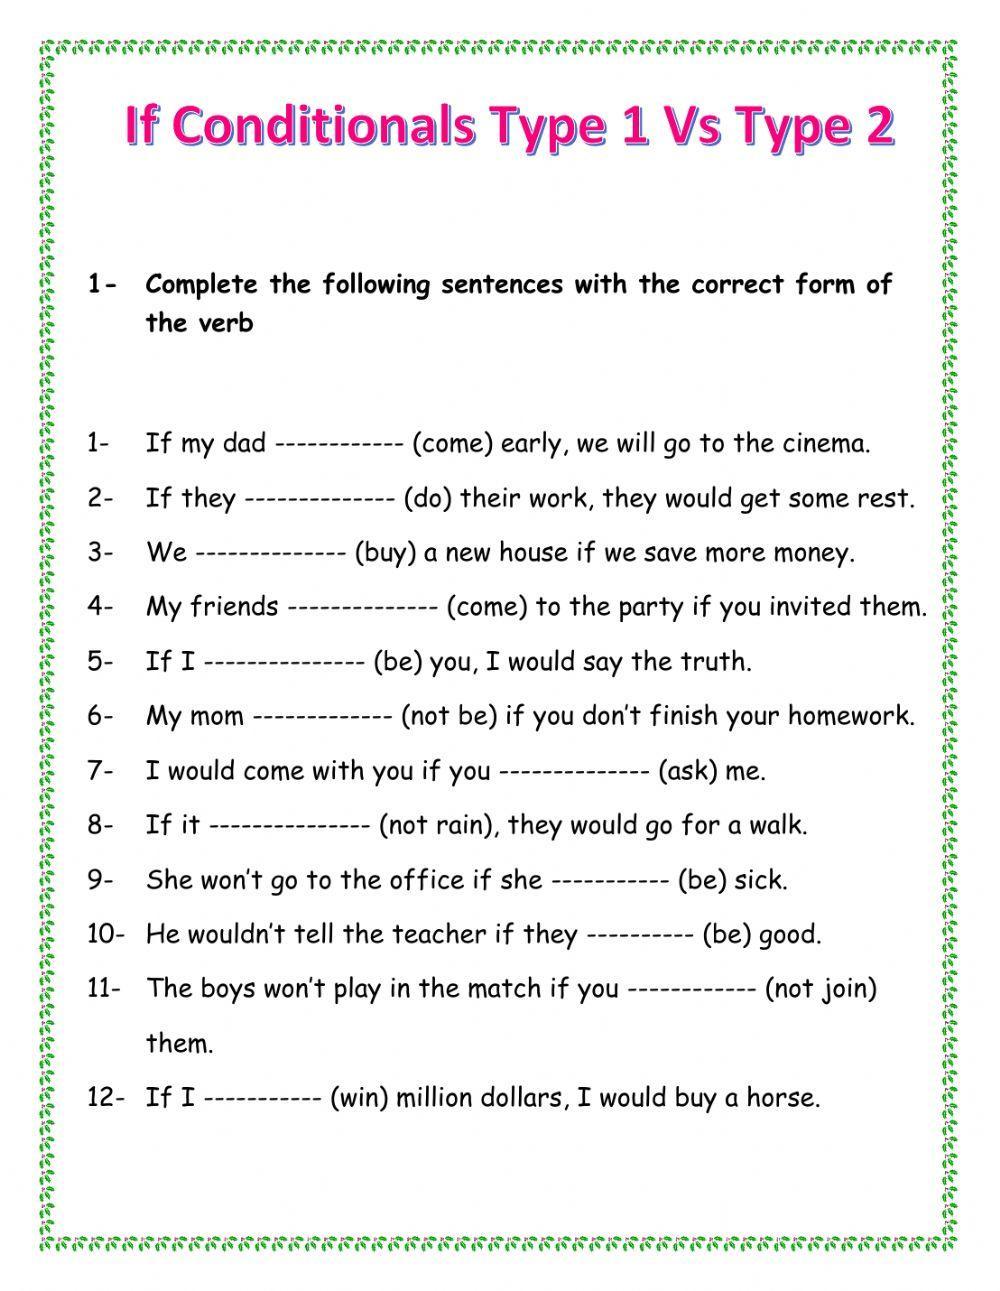 If Conditional Type 1 vs Type 2 worksheet | Live Worksheets